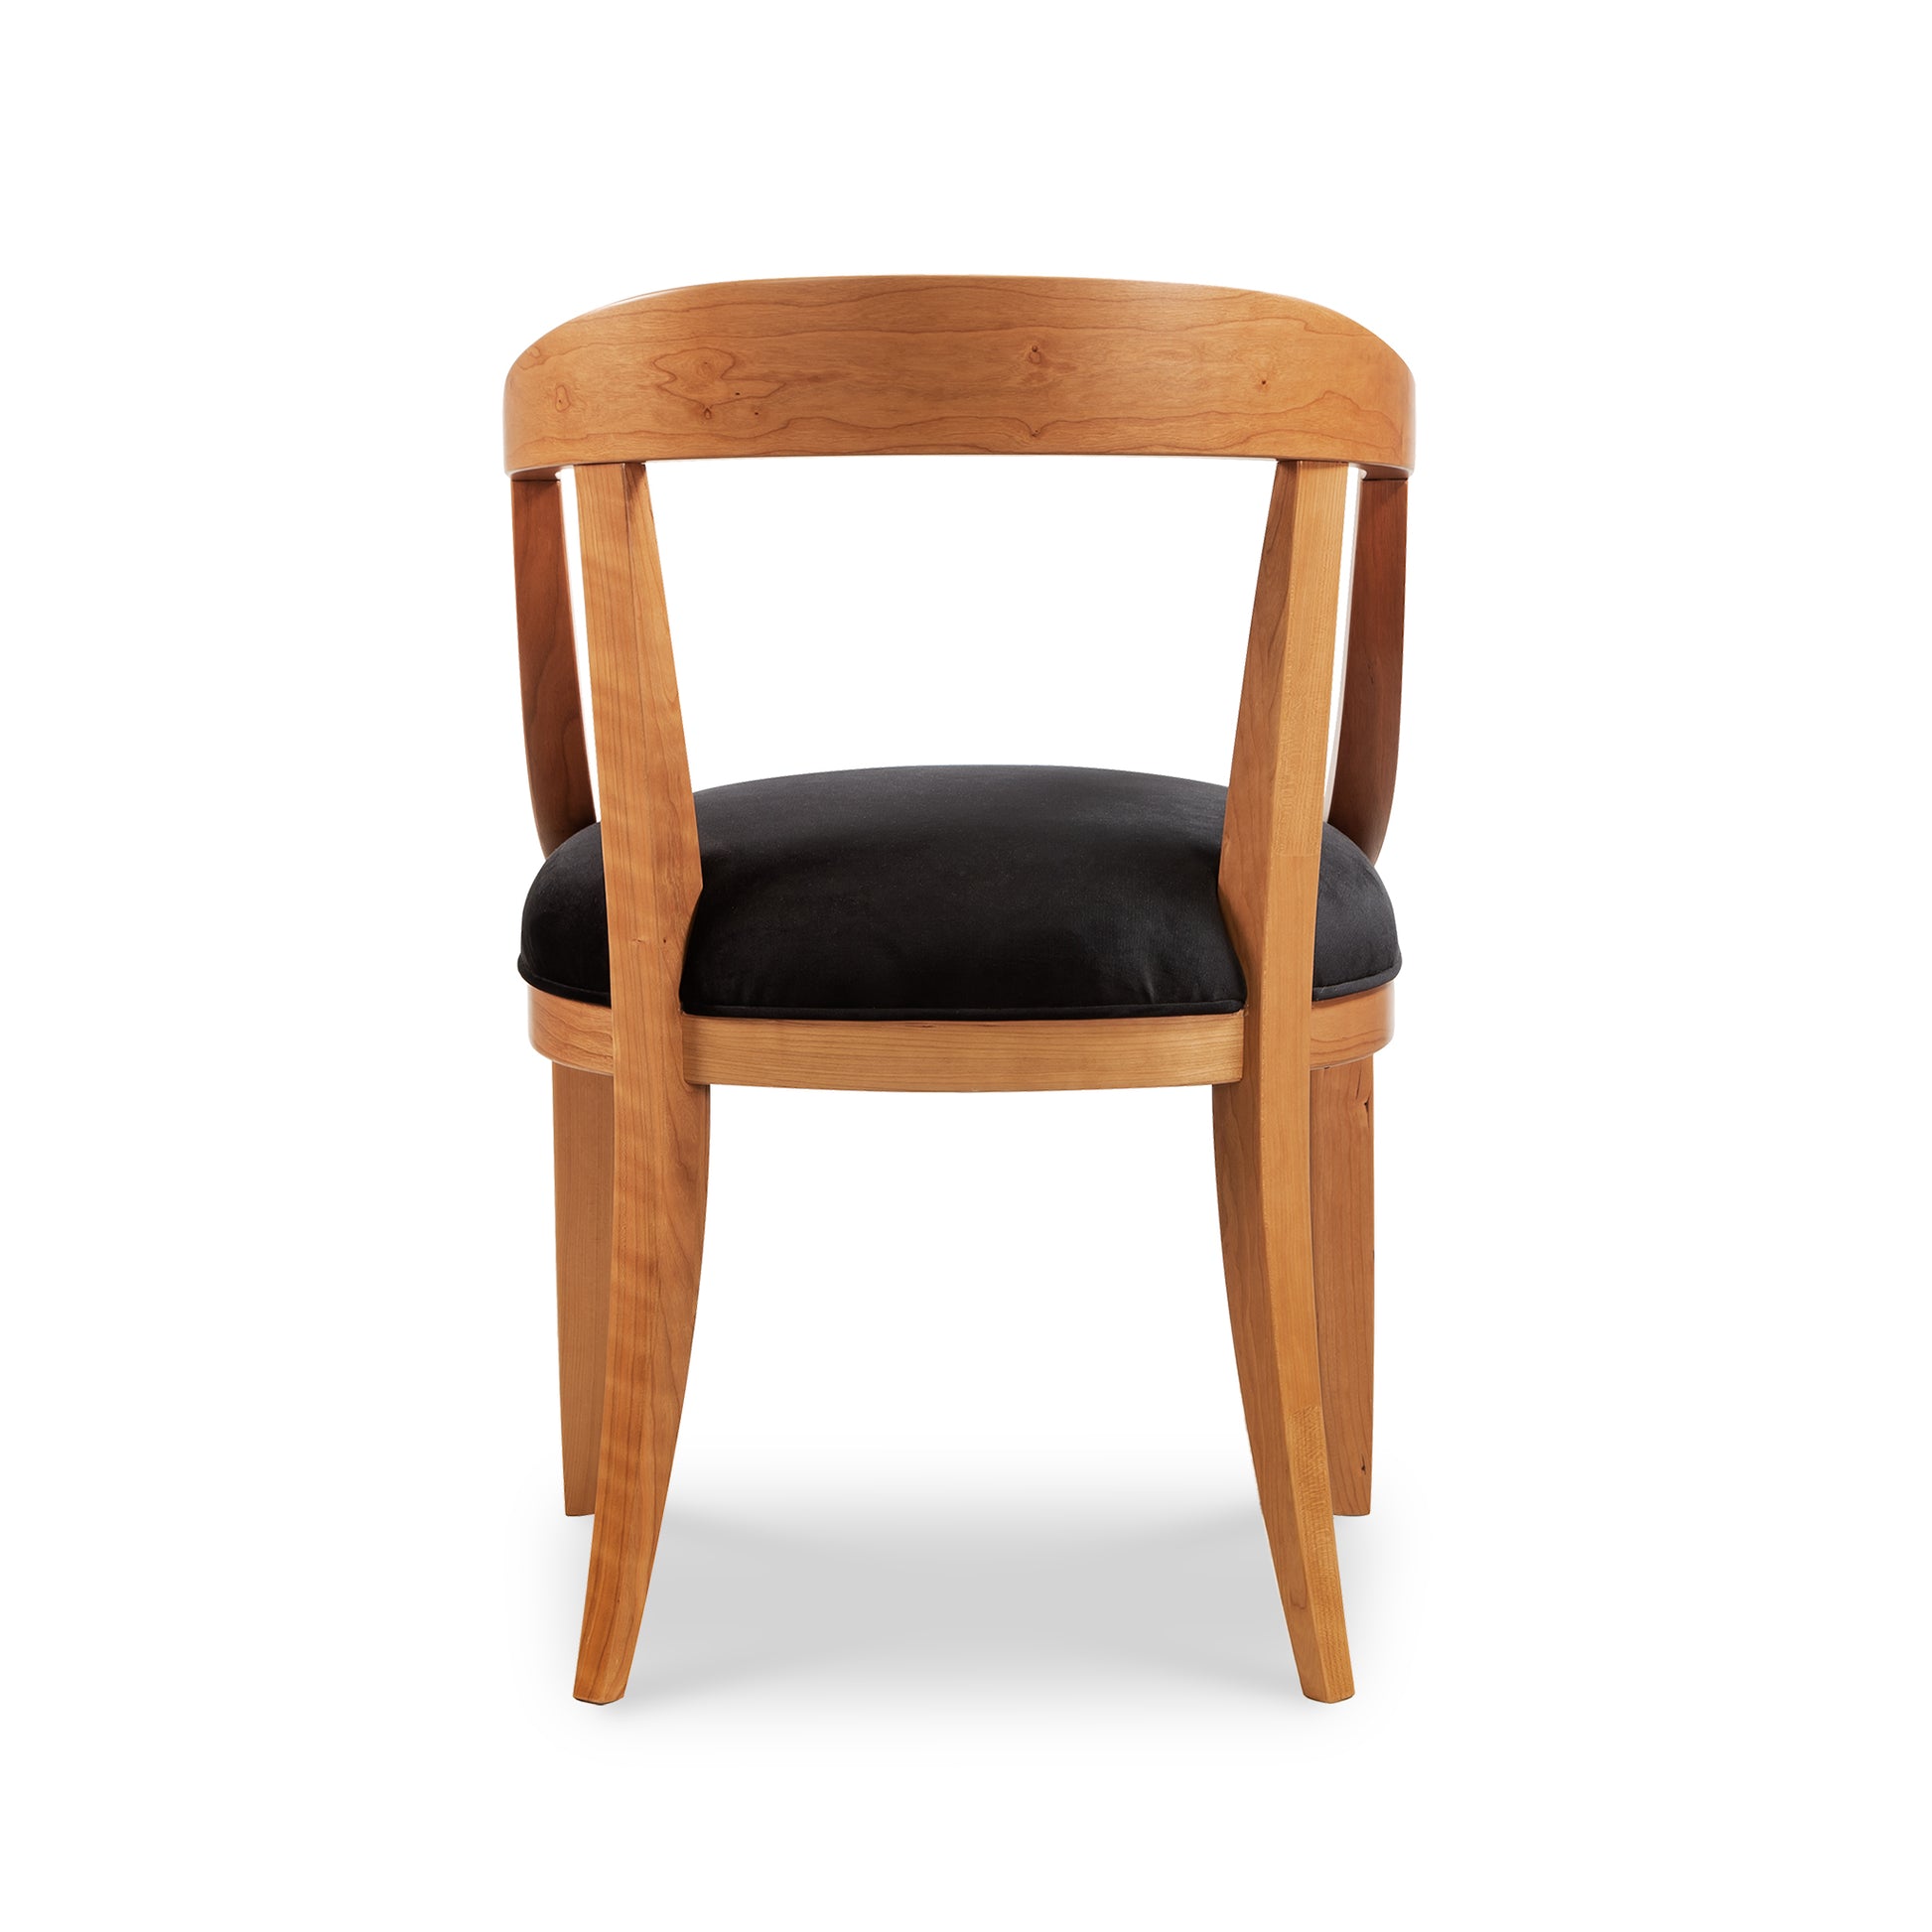 A Vermont Woods Studios Dorset chair with a curved backrest and a black upholstered seat, isolated on a white background.